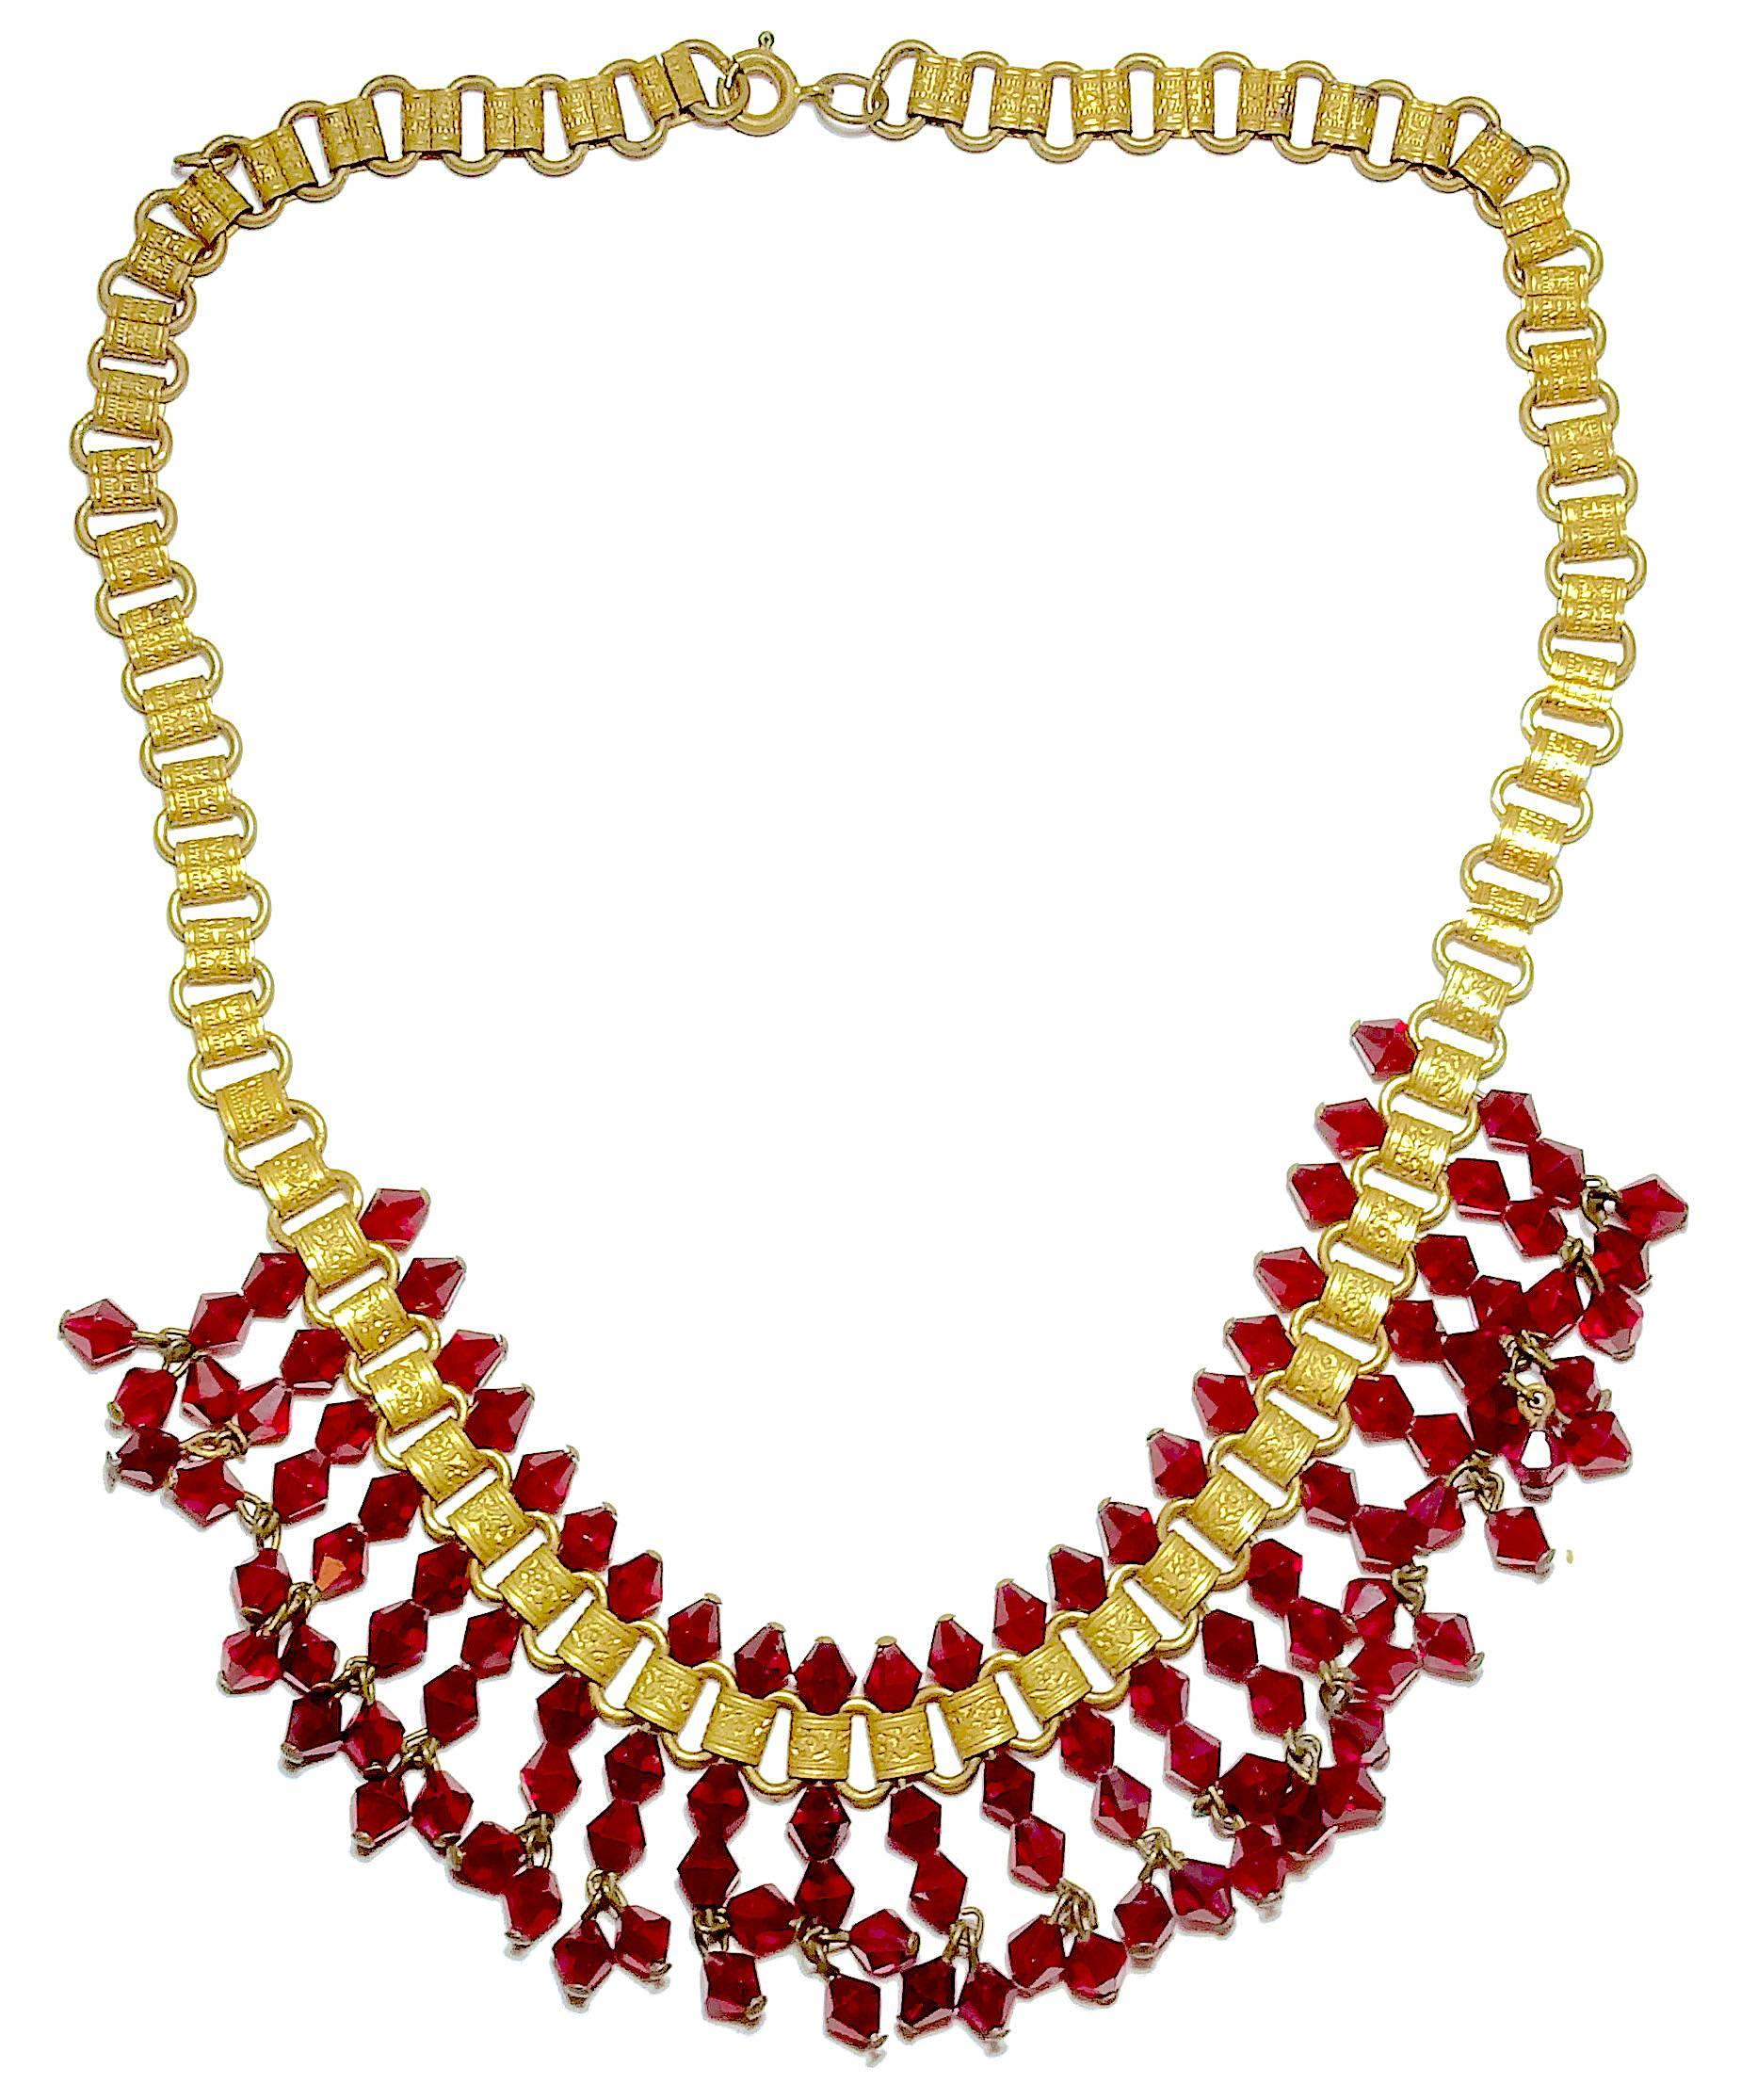 This necklace is designed with the old book chain necklace with old red Czech glass drops in the front.  This necklace is from the 1930s and made with a brass tone base metal.  It measures 16-1/2” long falls 1-1/4